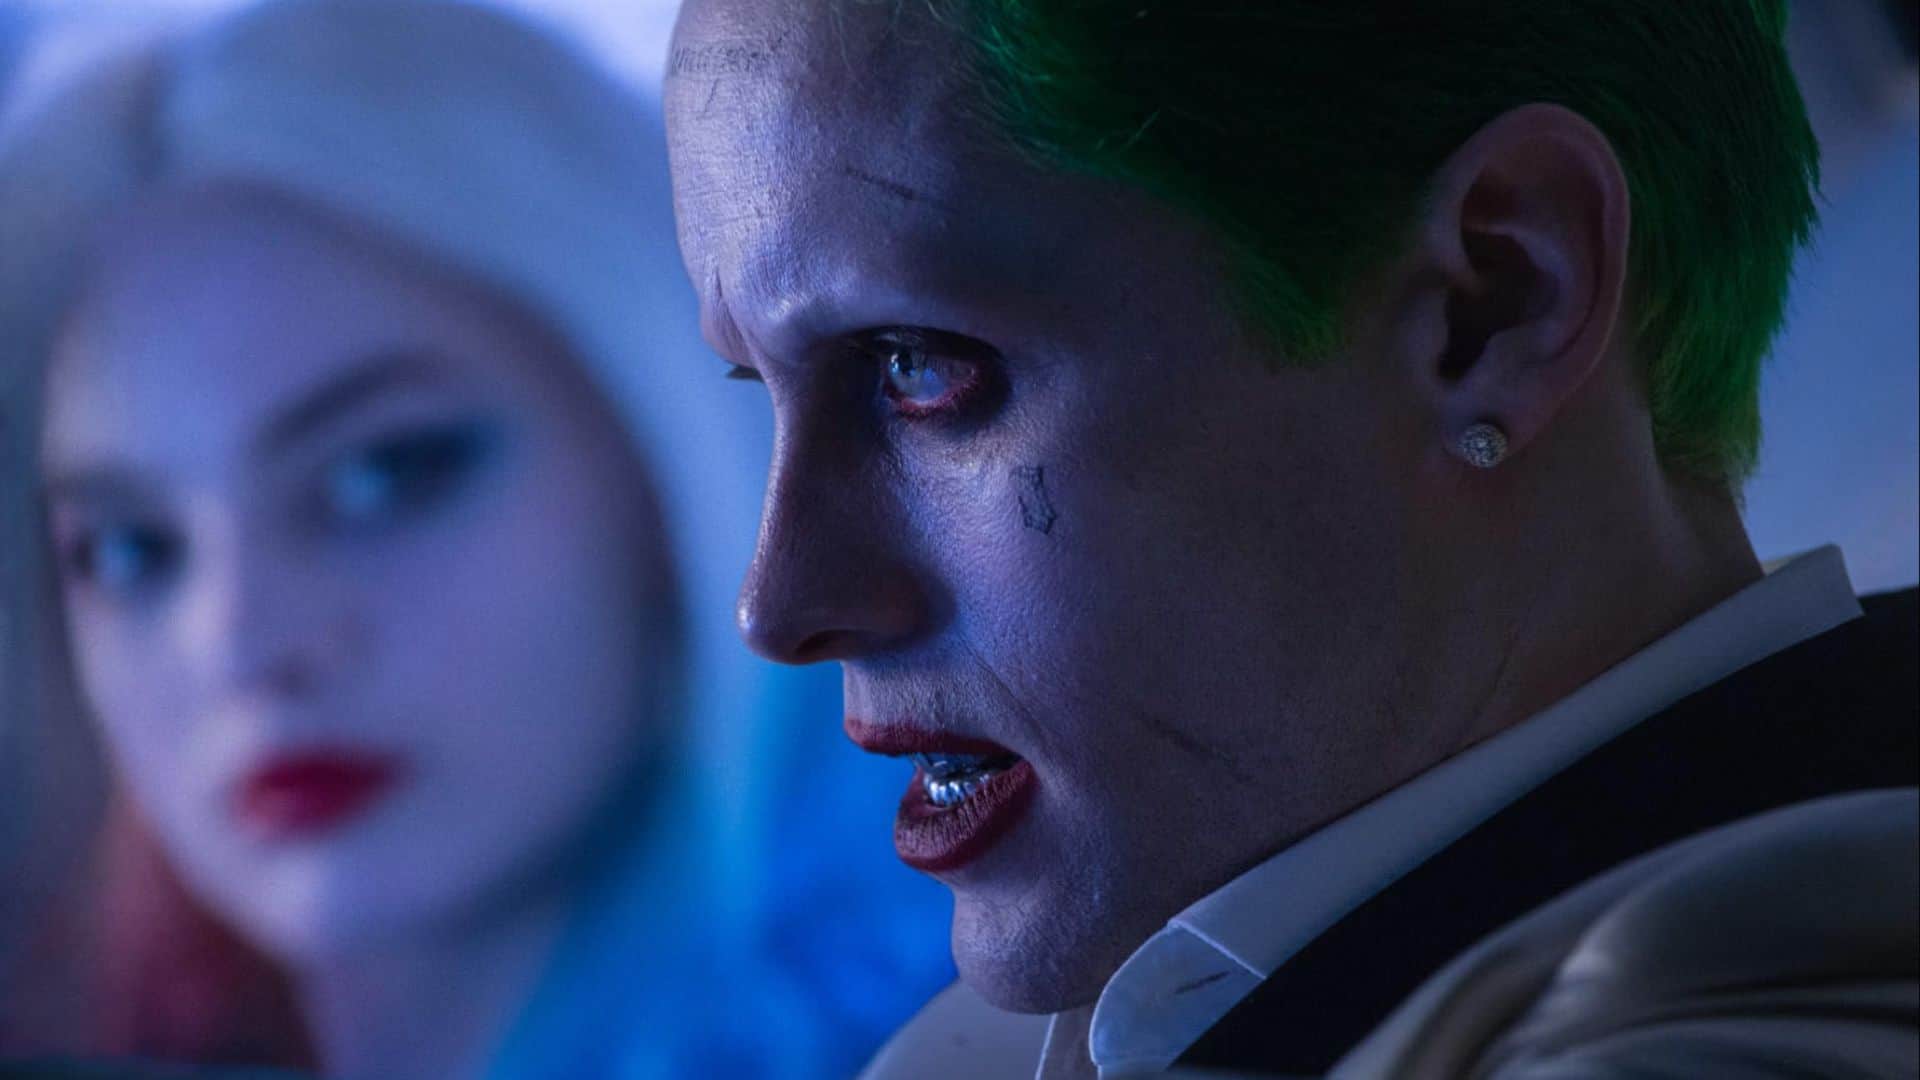 A blonde woman looks at a man with green hair and face tattoos in this image from Atlas Entertainment.